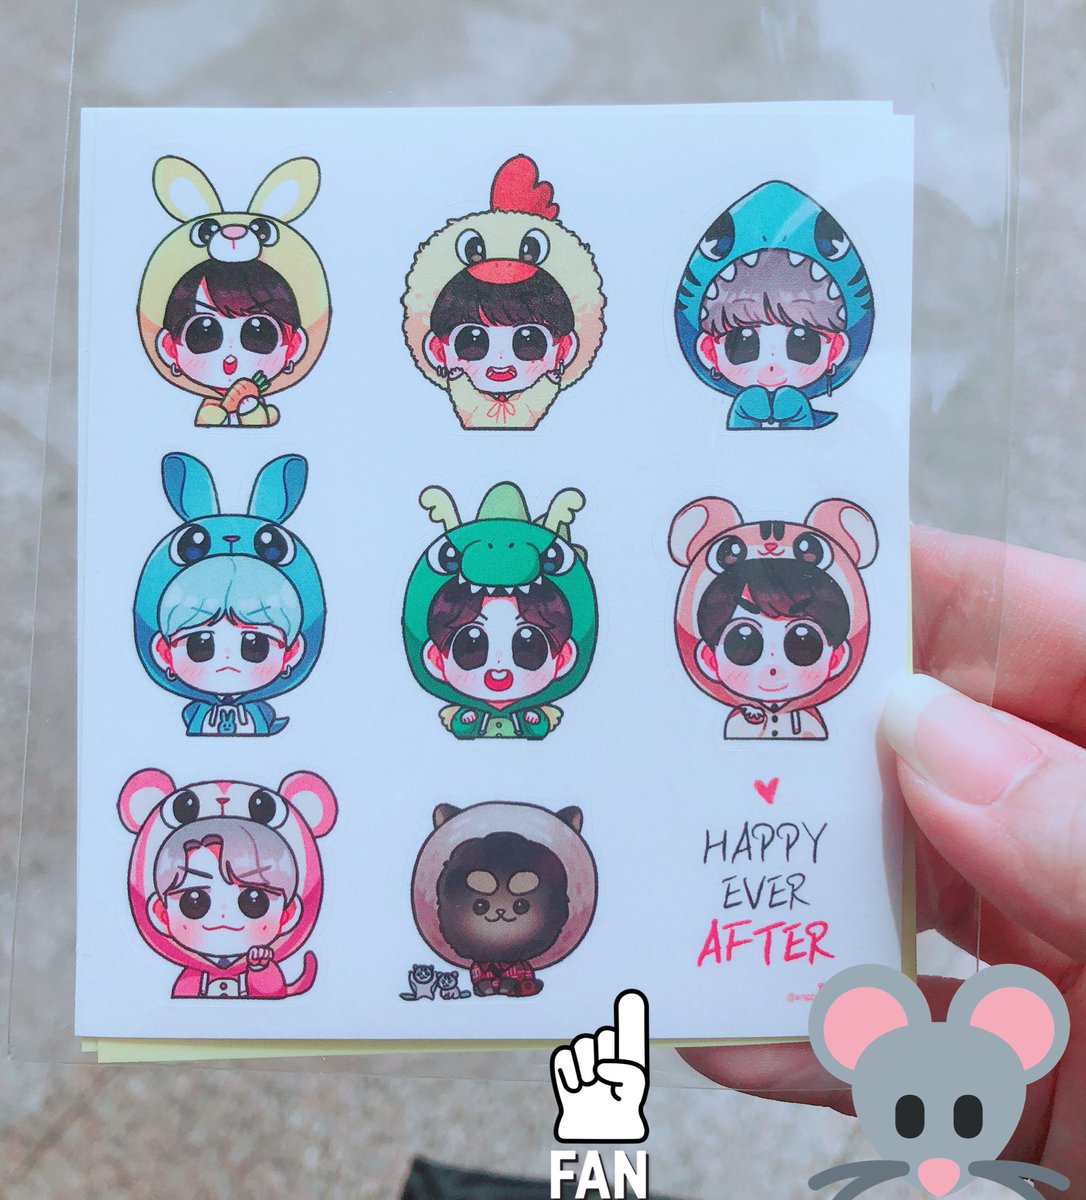 Thank you @anggonim for designing these cute stickers & thank you @doublevoltage for taking this GO.. they are so cute omg 😍😍